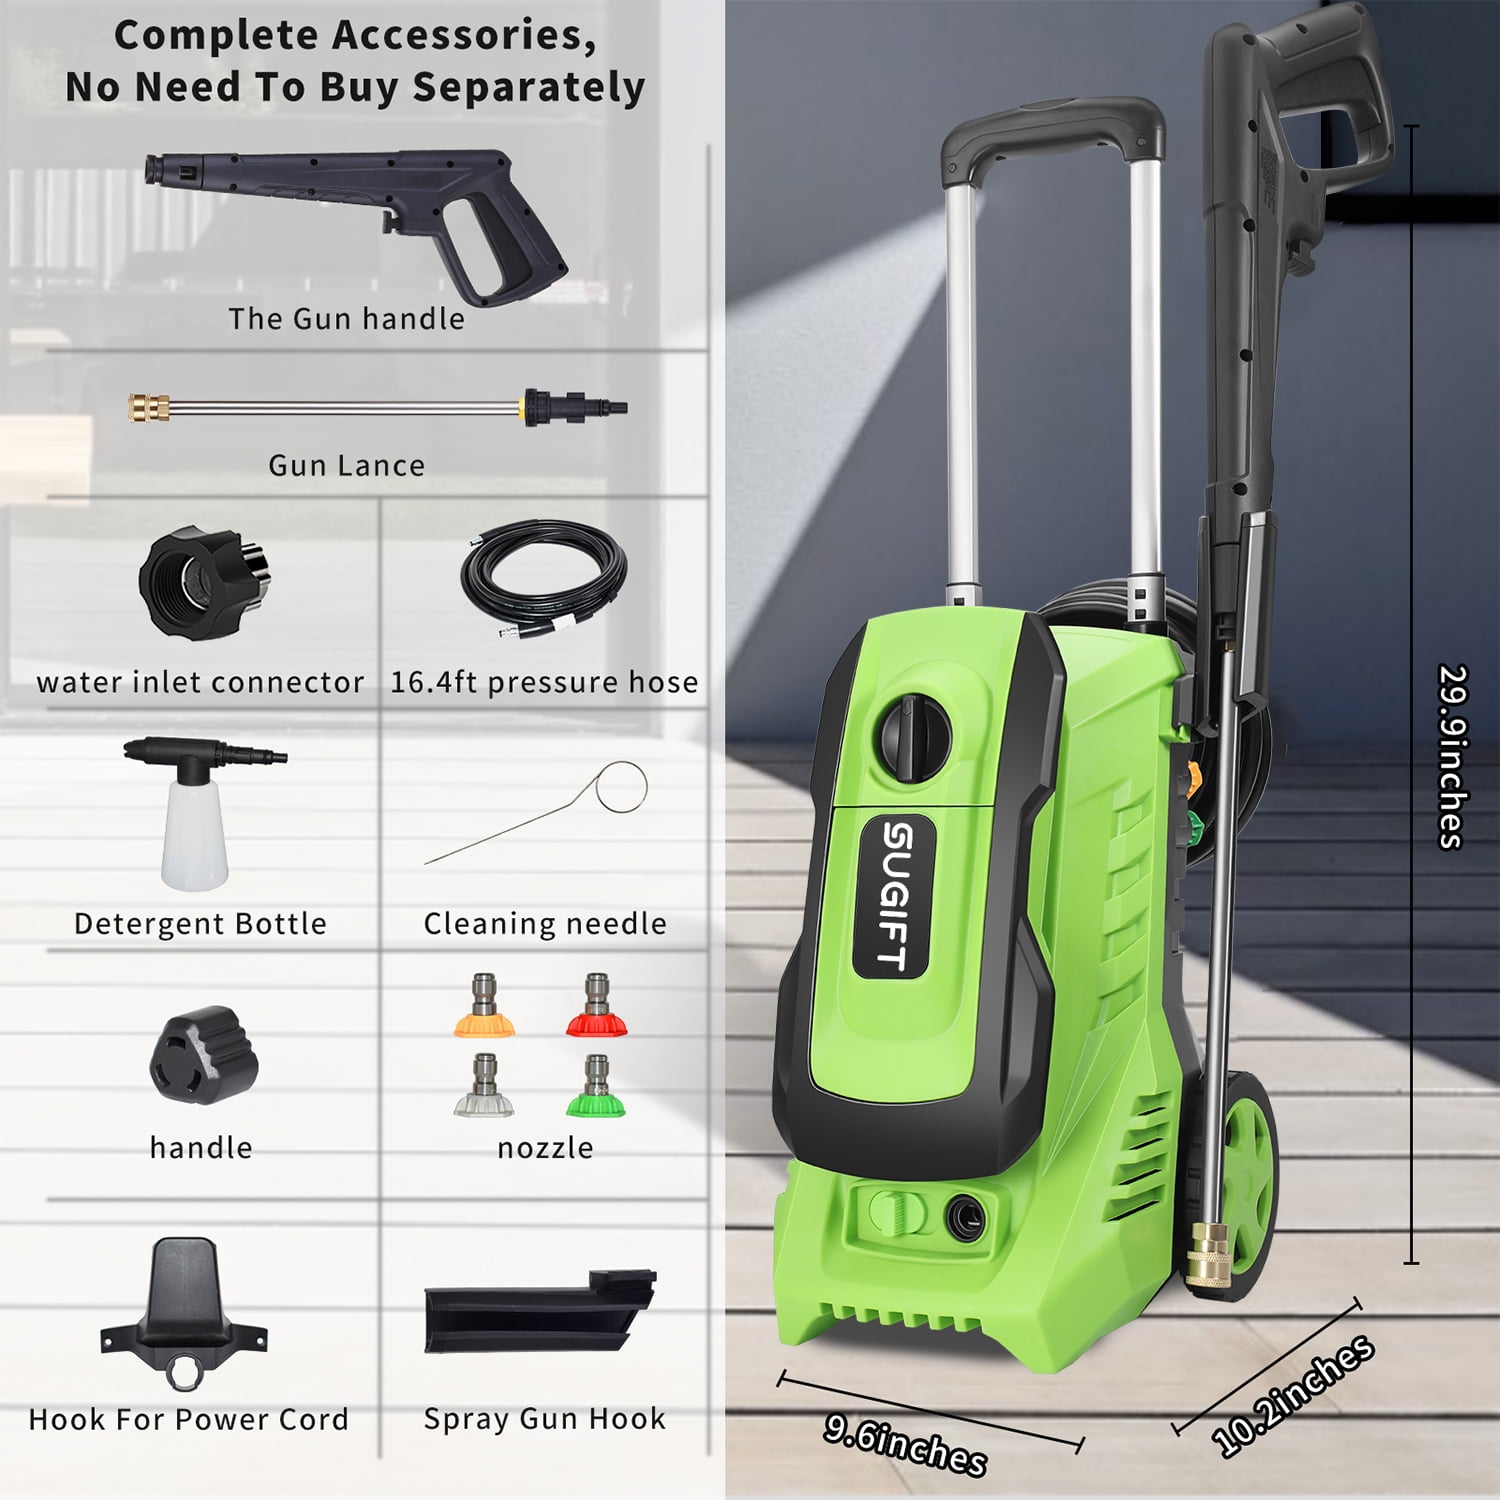 Sugift 3000 Maximum PSI 2 GPM 13 Amp Cold Water Electric Pressure Washer with 5 Nozzles